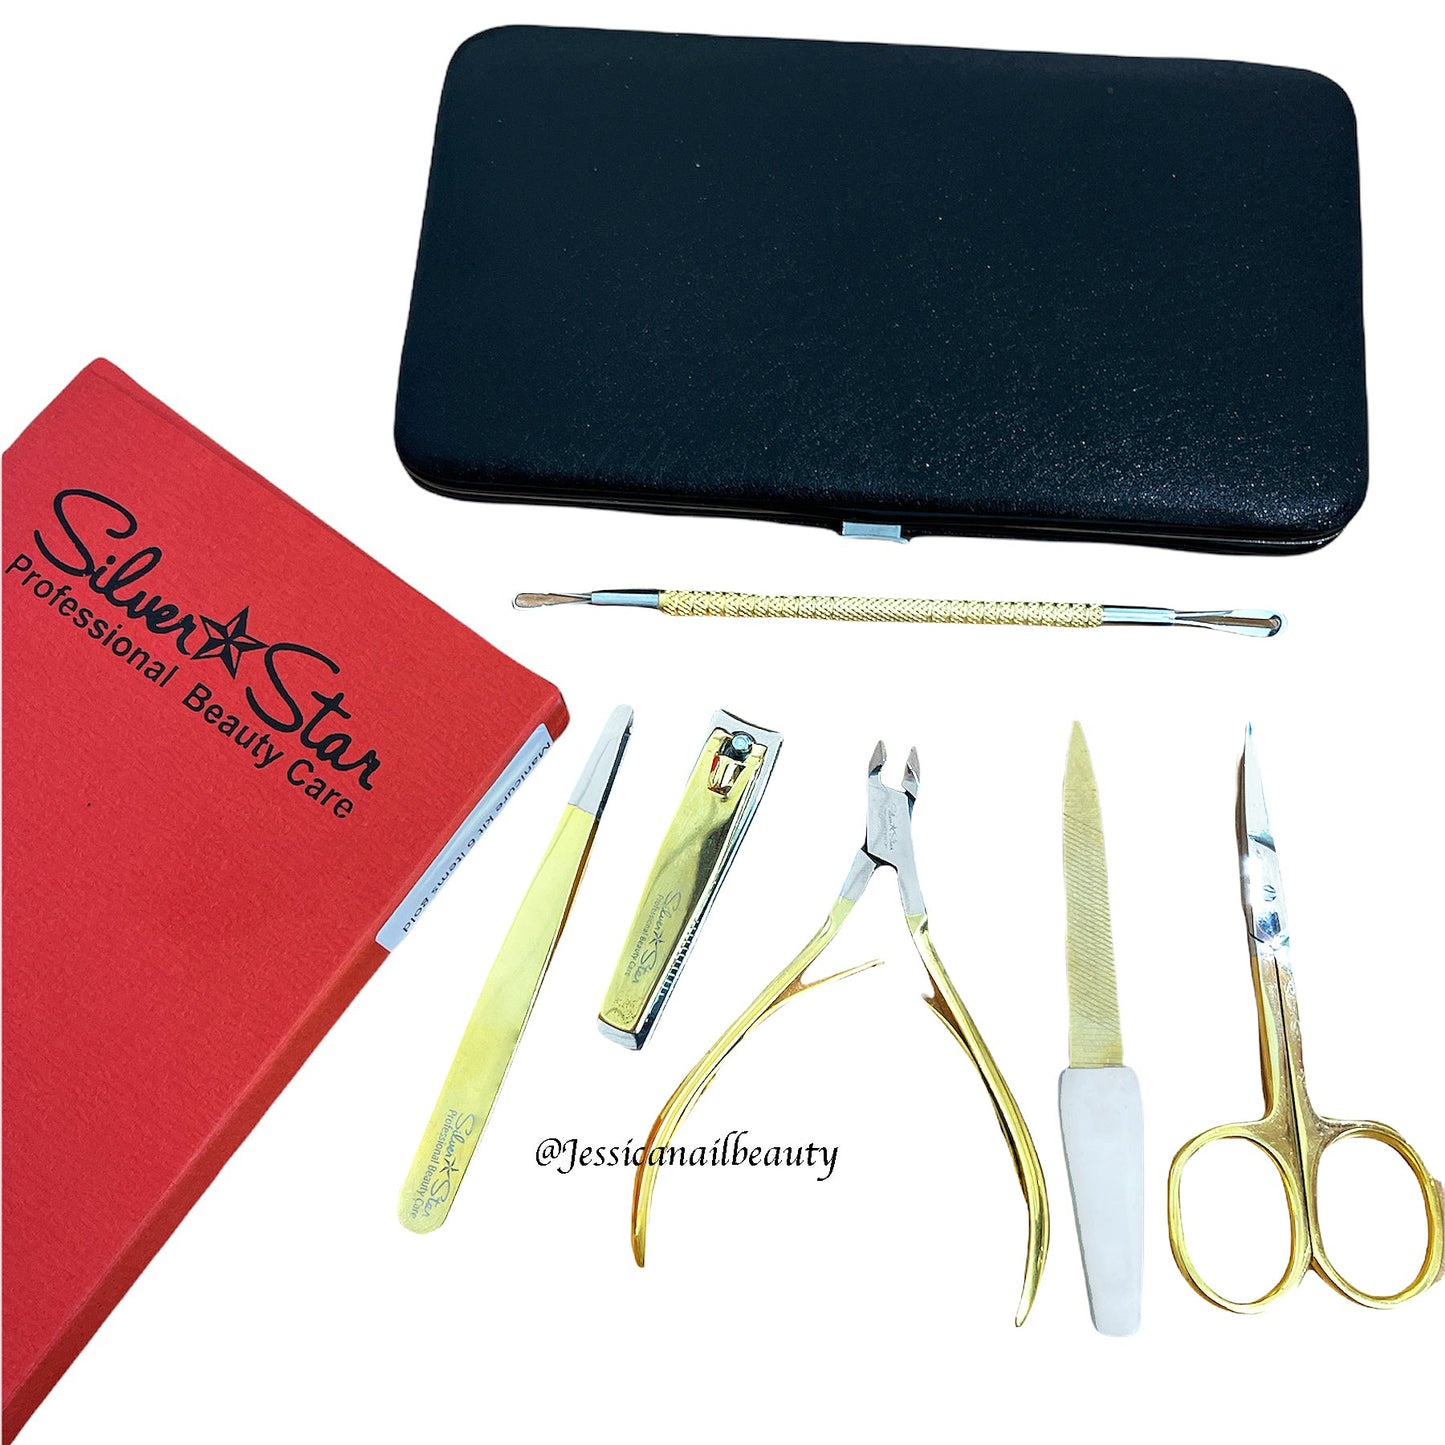 Silver Star - Portable Stainless Steel Manicure kit ( Set of 6pcs) GOLD